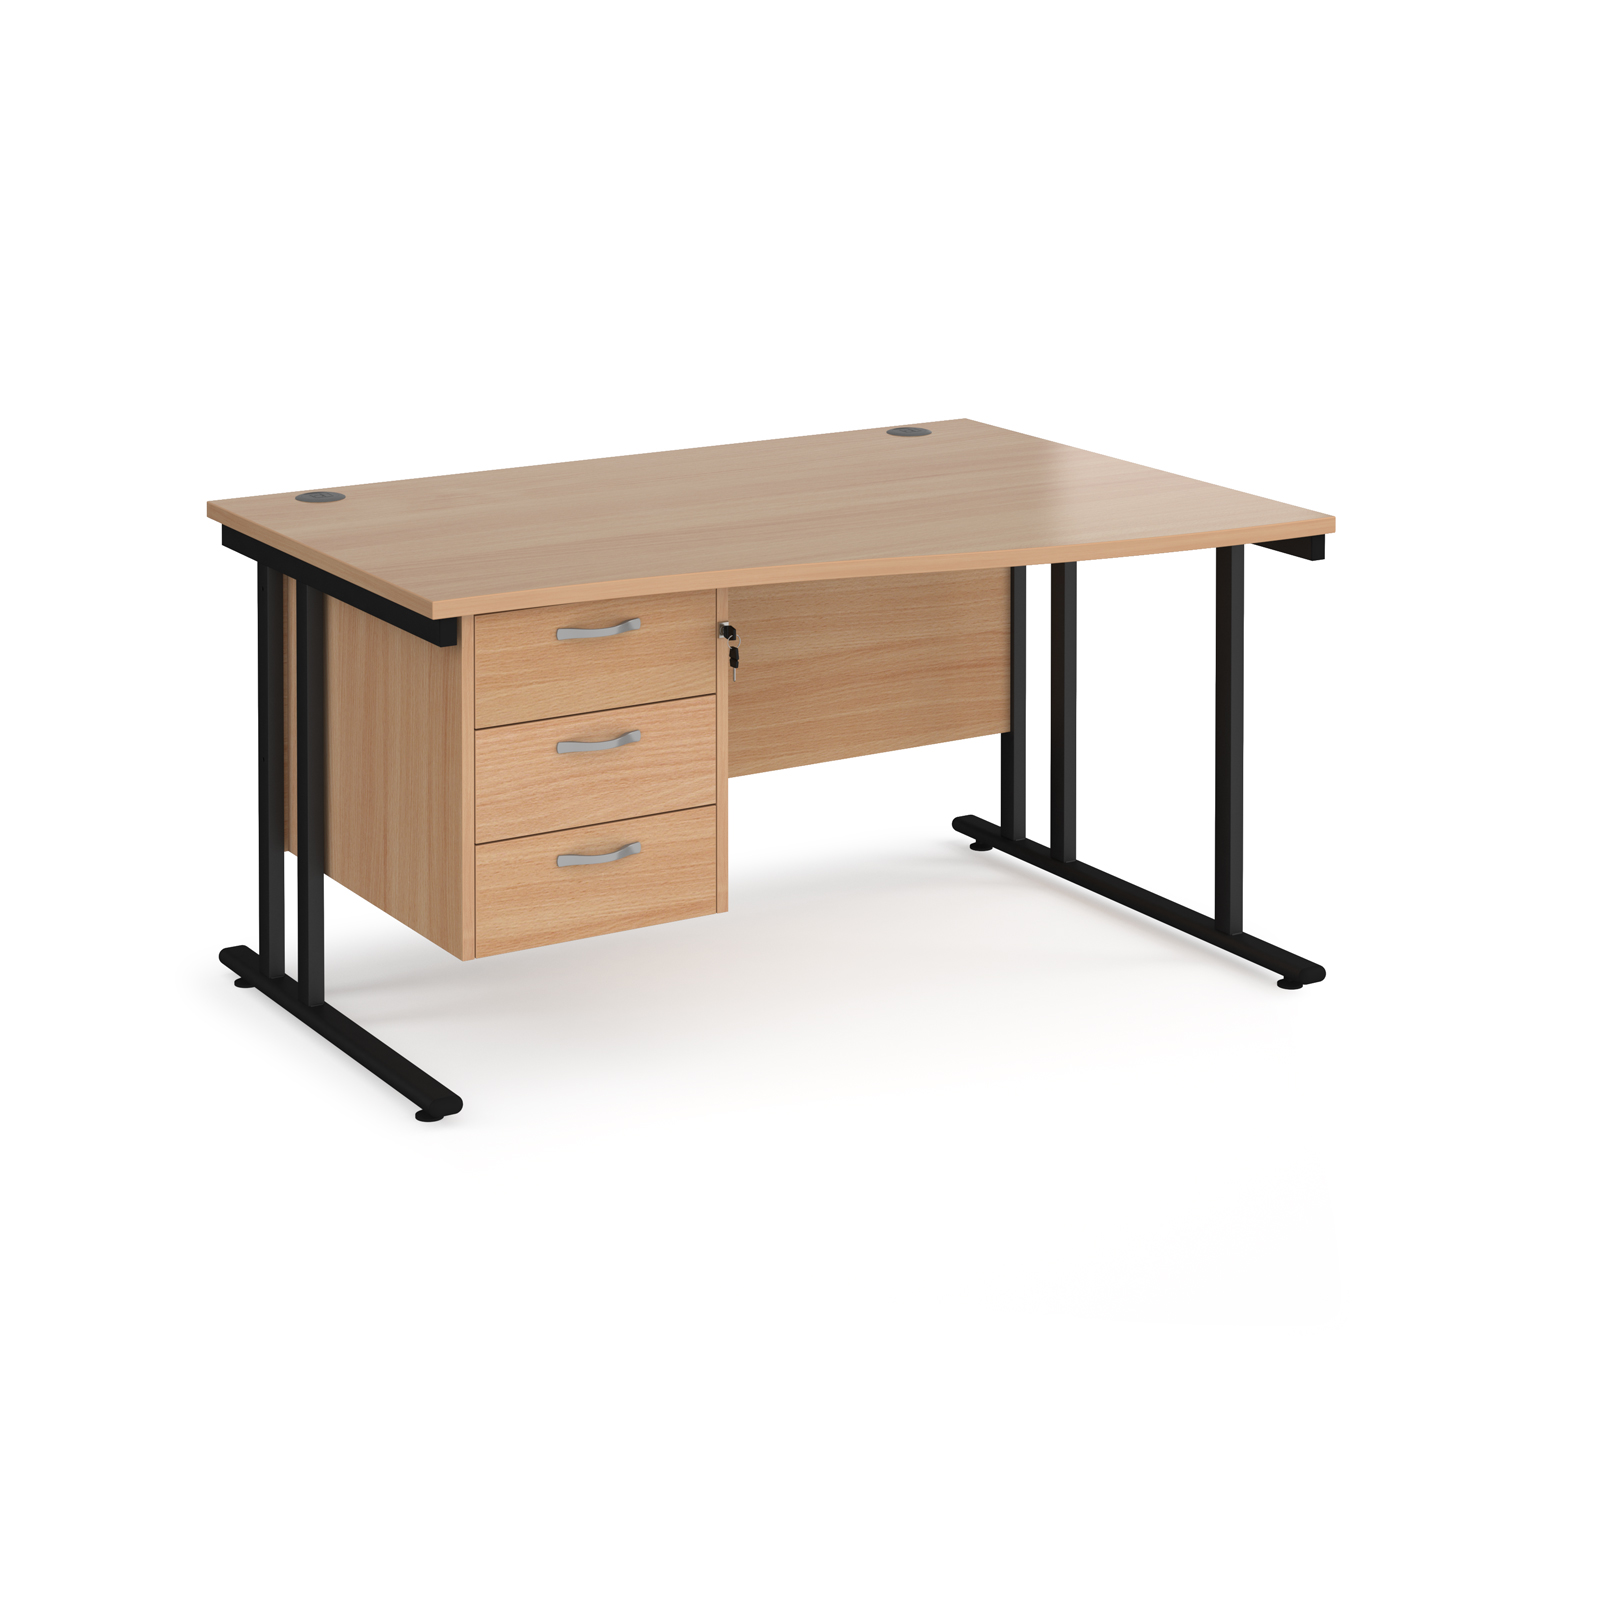 Maestro 25 right hand wave desk 1400mm wide with 3 drawer pedestal - black cantilever leg frame, beech top